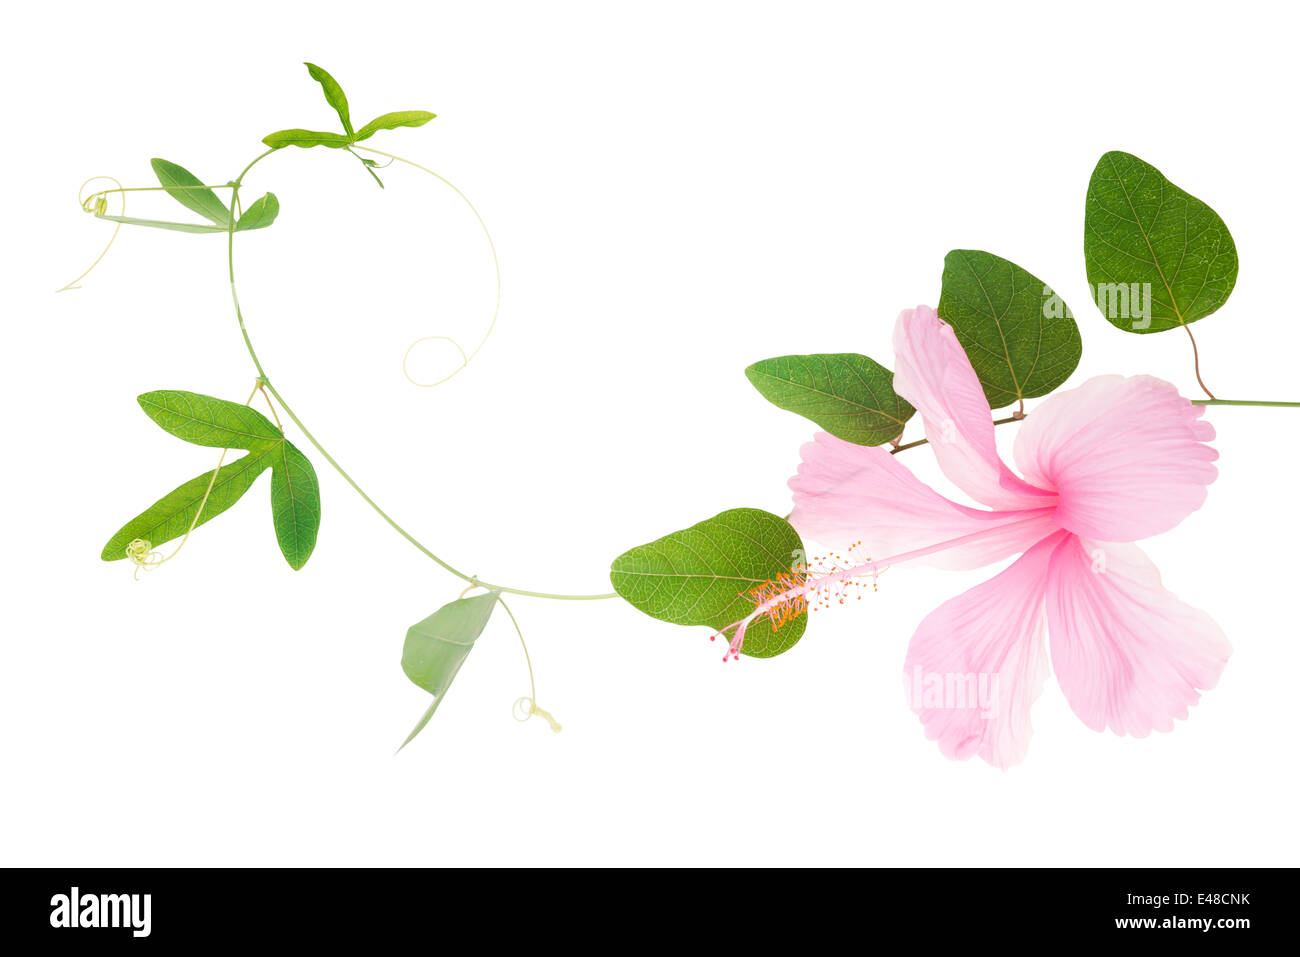 Green passionflower plant and hibiscus close up is isolated on white background Stock Photo